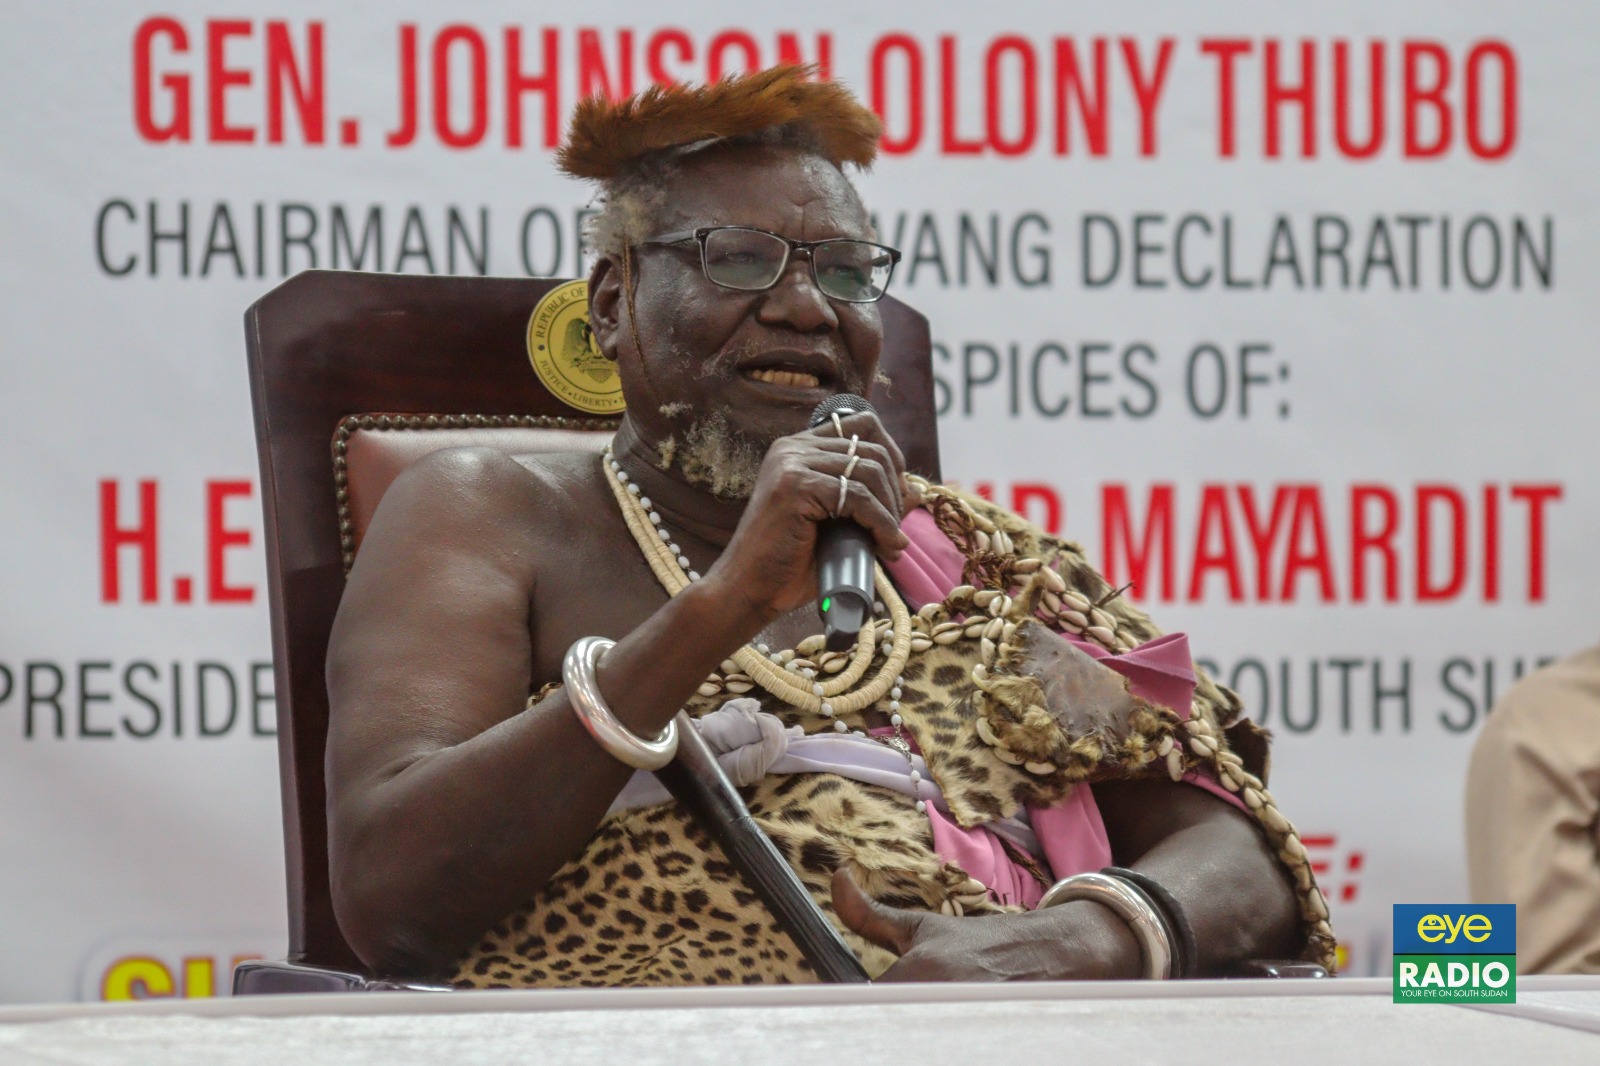 Chollo King urges Upper Nile communities to return home